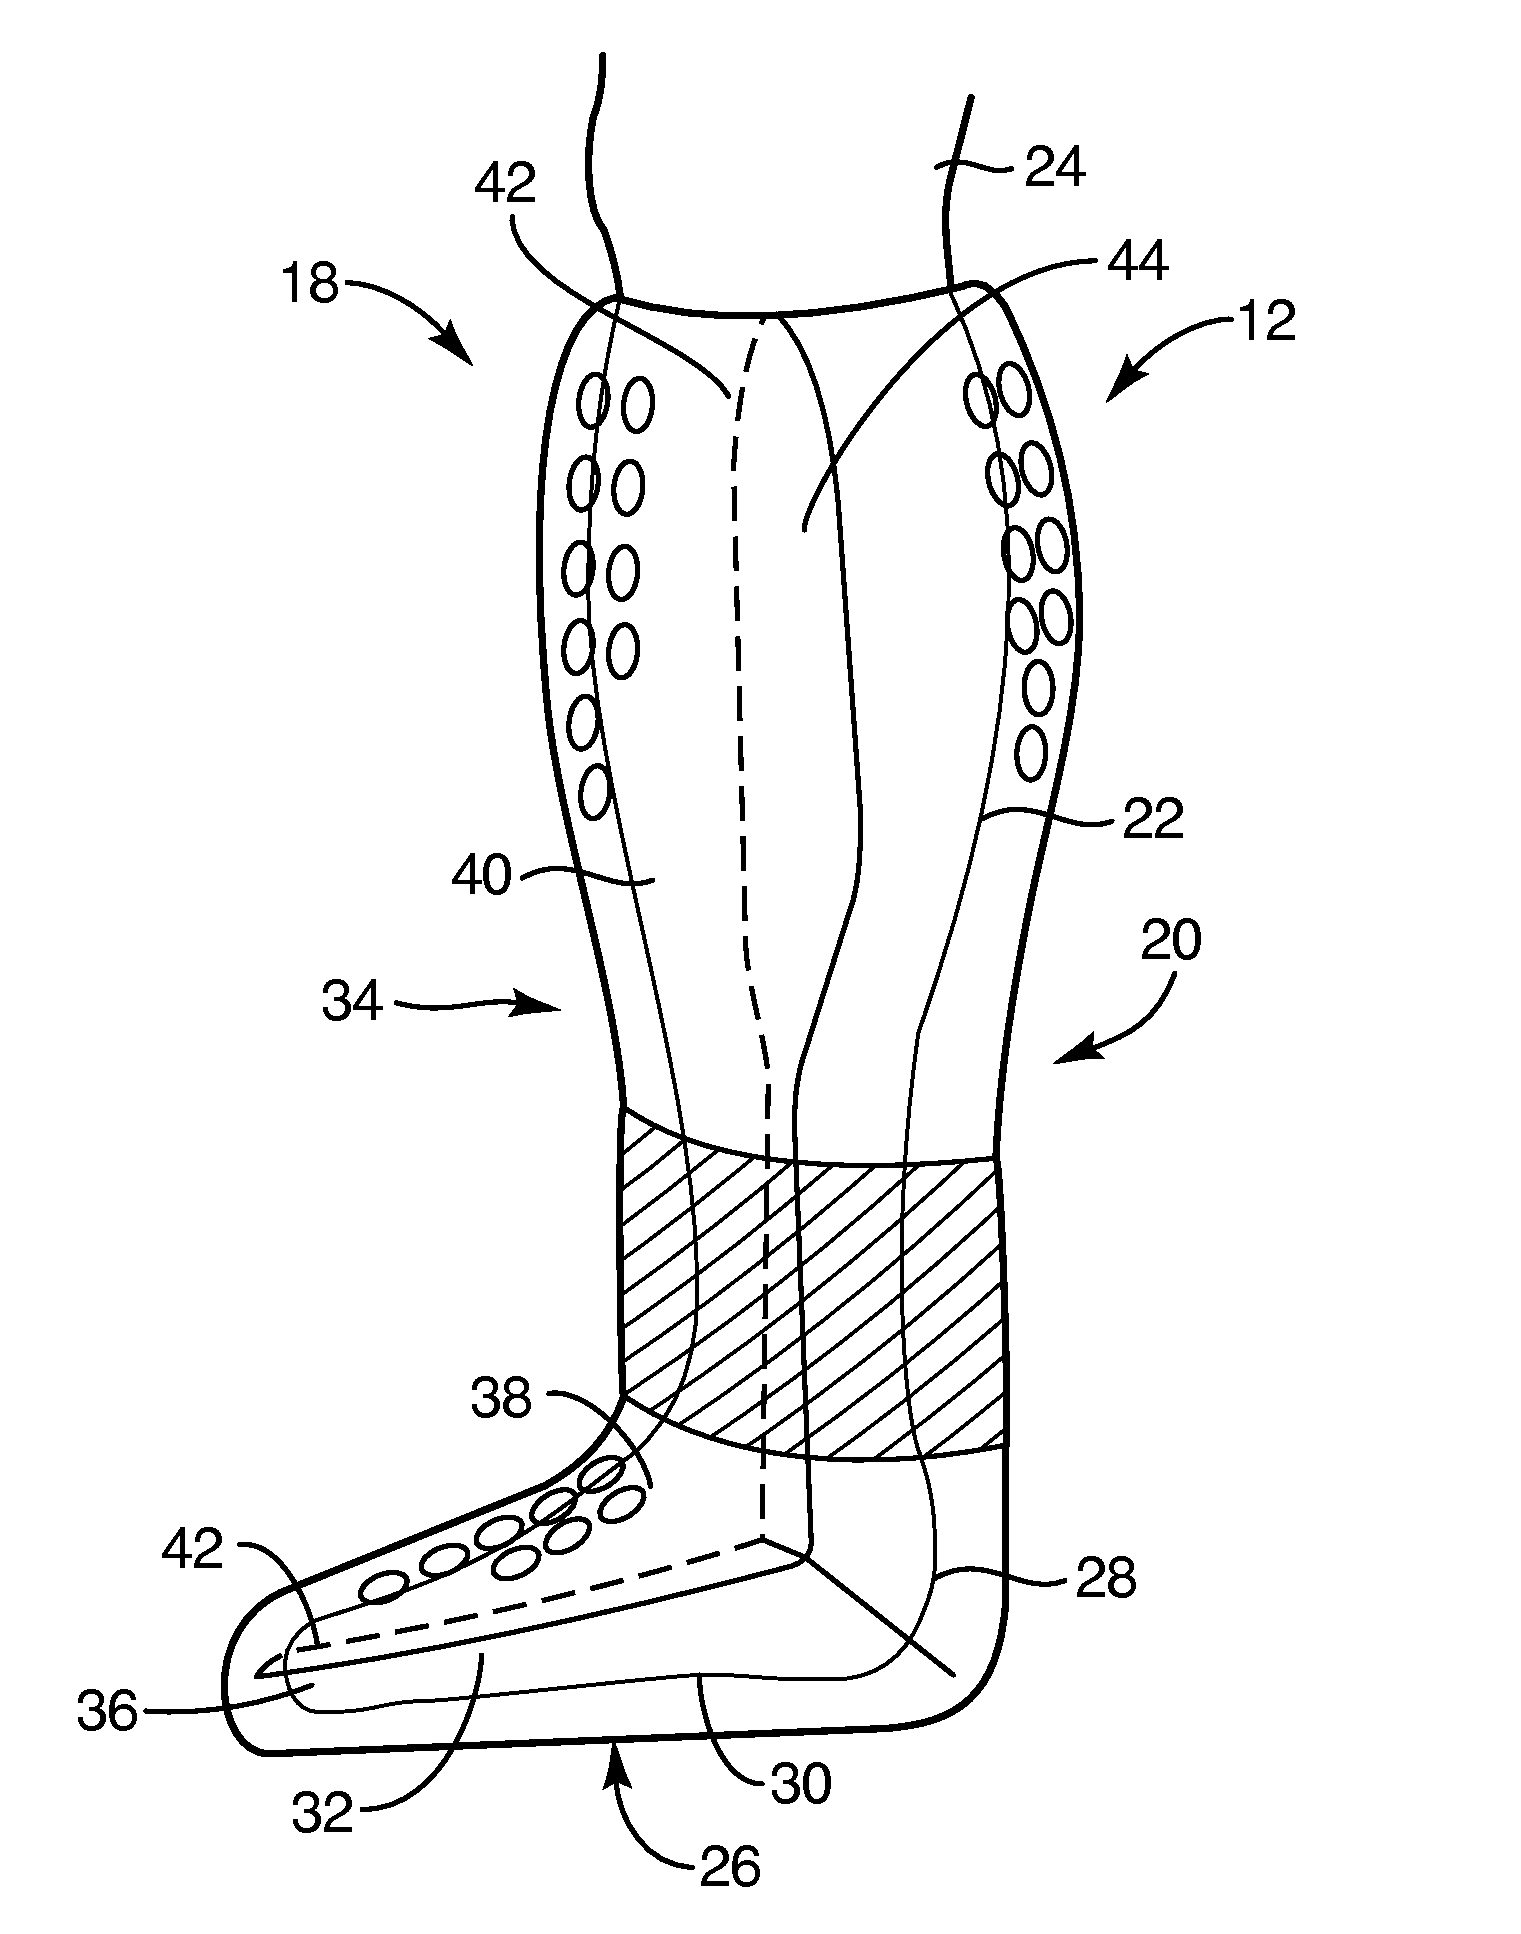 Systems and methods for providing a shear reduction system for an orthopedic cast